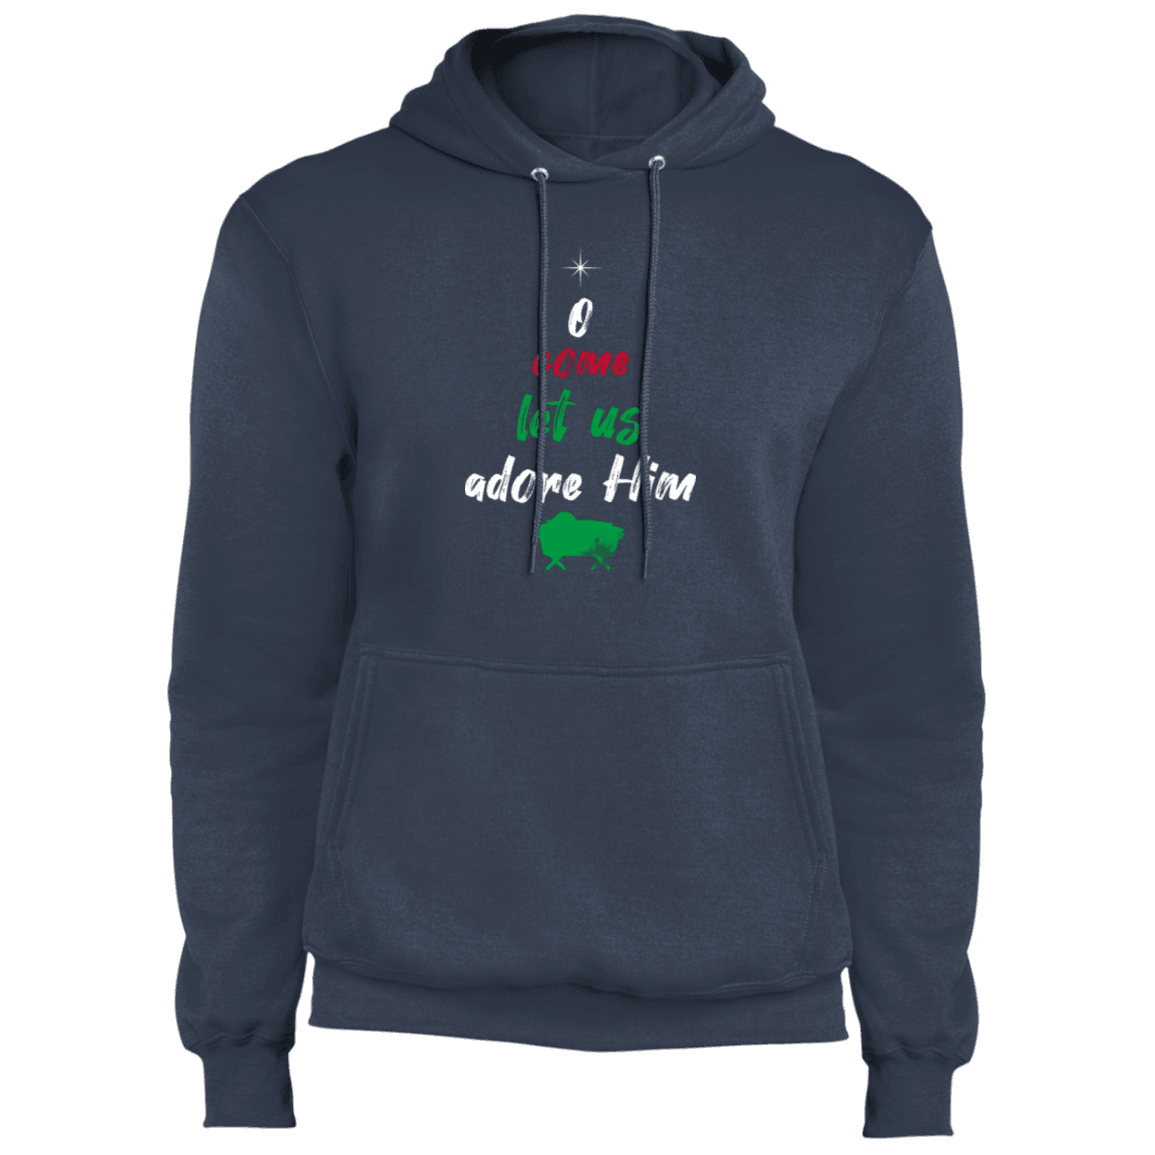 Designs by MyUtopia Shout Out:O Come Let Us Adore Him - Core Fleece Unisex Pullover Hoodie,Navy / S,Sweatshirts